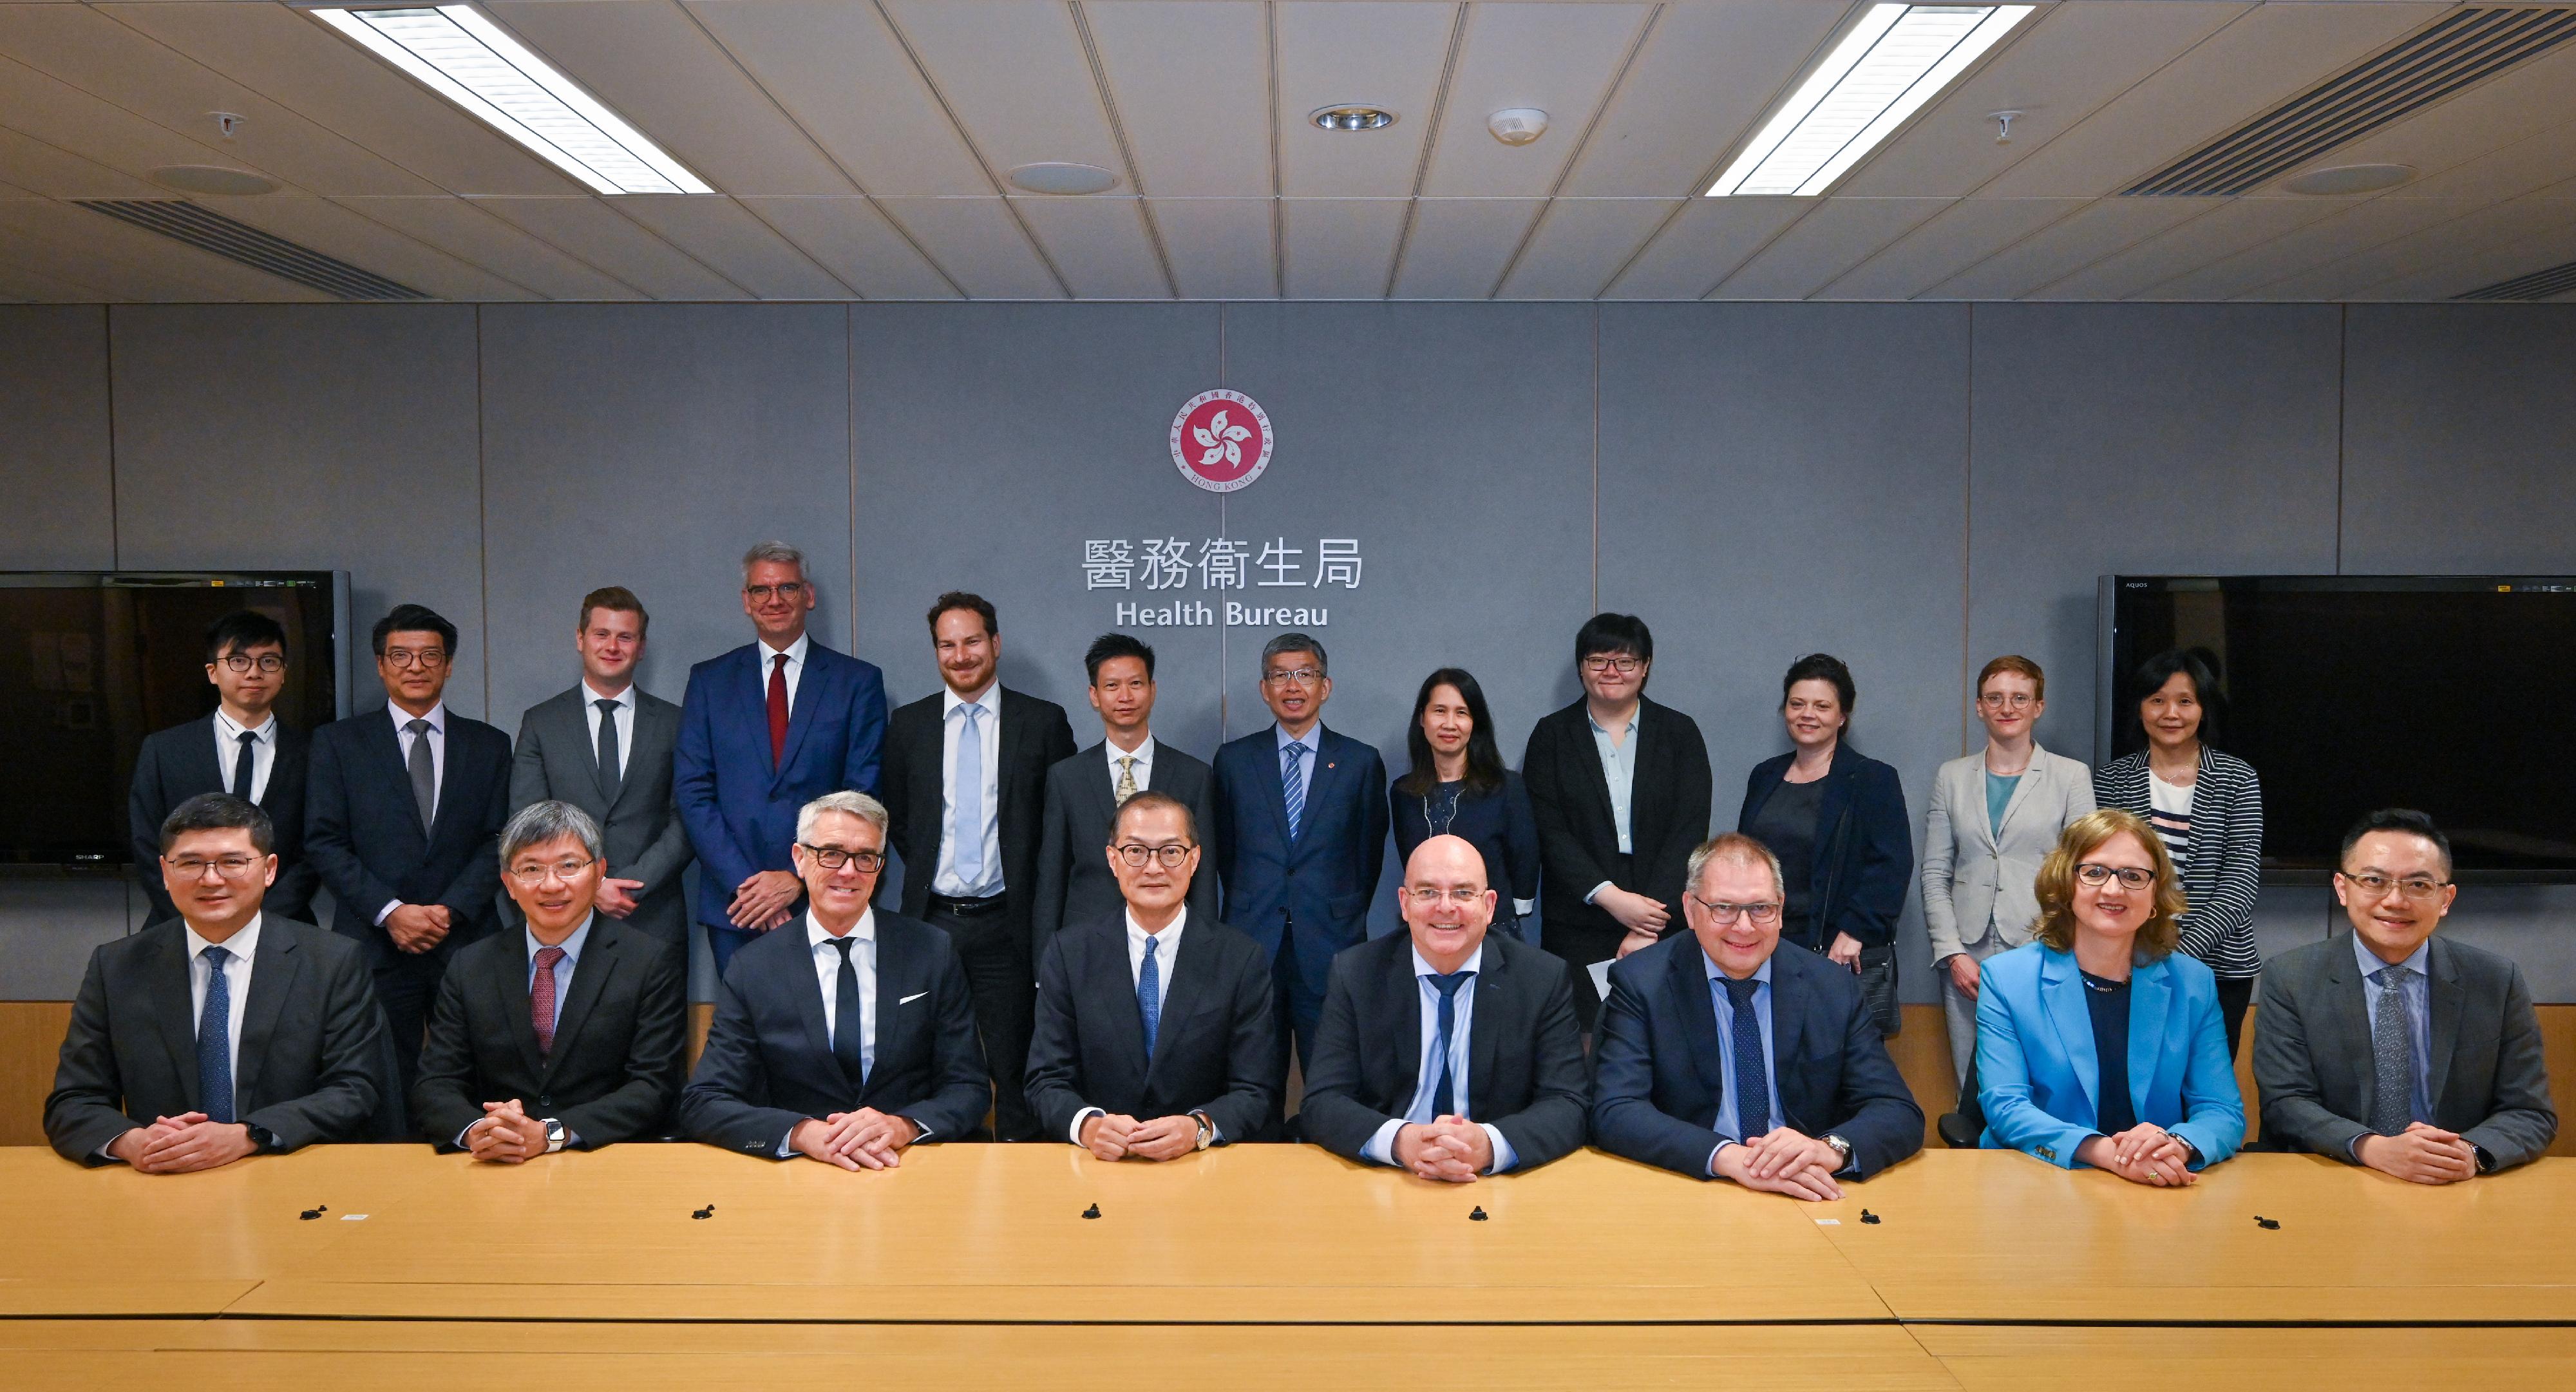 The Secretary for Health, Professor Lo Chung-mau, met with a delegation led by Parliamentary State Secretary to the Federal Minister of Health of Germany Professor Edgar Franke today (May 18). Photo shows Professor Lo (front row, fourth left); Professor Edgar Franke (front row, fourth right); the Permanent Secretary for Health, Mr Thomas Chan (front row, second left); the Director of Health, Dr Ronald Lam (front row, first right); Deputy Secretary for Health Mr Sam Hui (back row, sixth left); the Commissioner for Primary Healthcare, Dr Pang Fei-chau (back row, second left); and the Chief Executive of the Hospital Authority, Dr Tony Ko (front row, first left), and other attendees of the meeting.